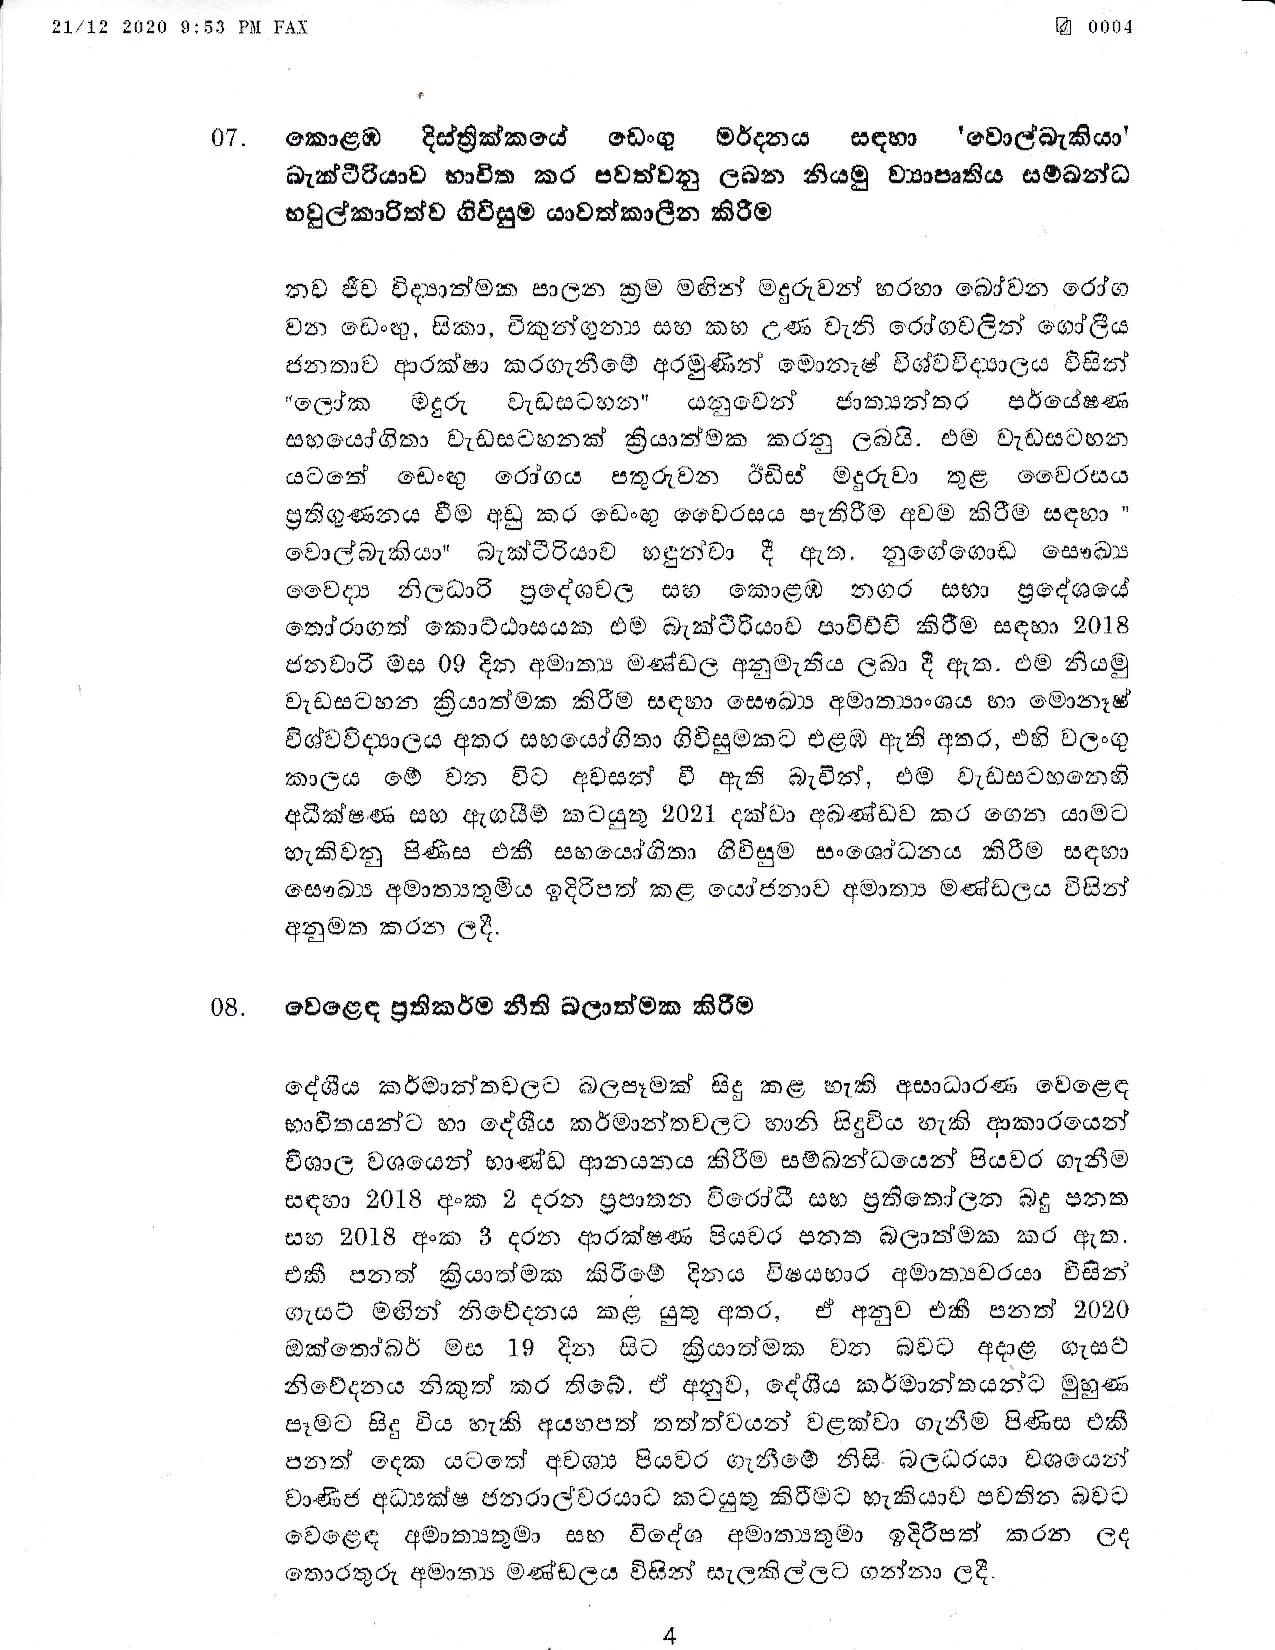 Cabinet Decision on 21.12.2020 page 004